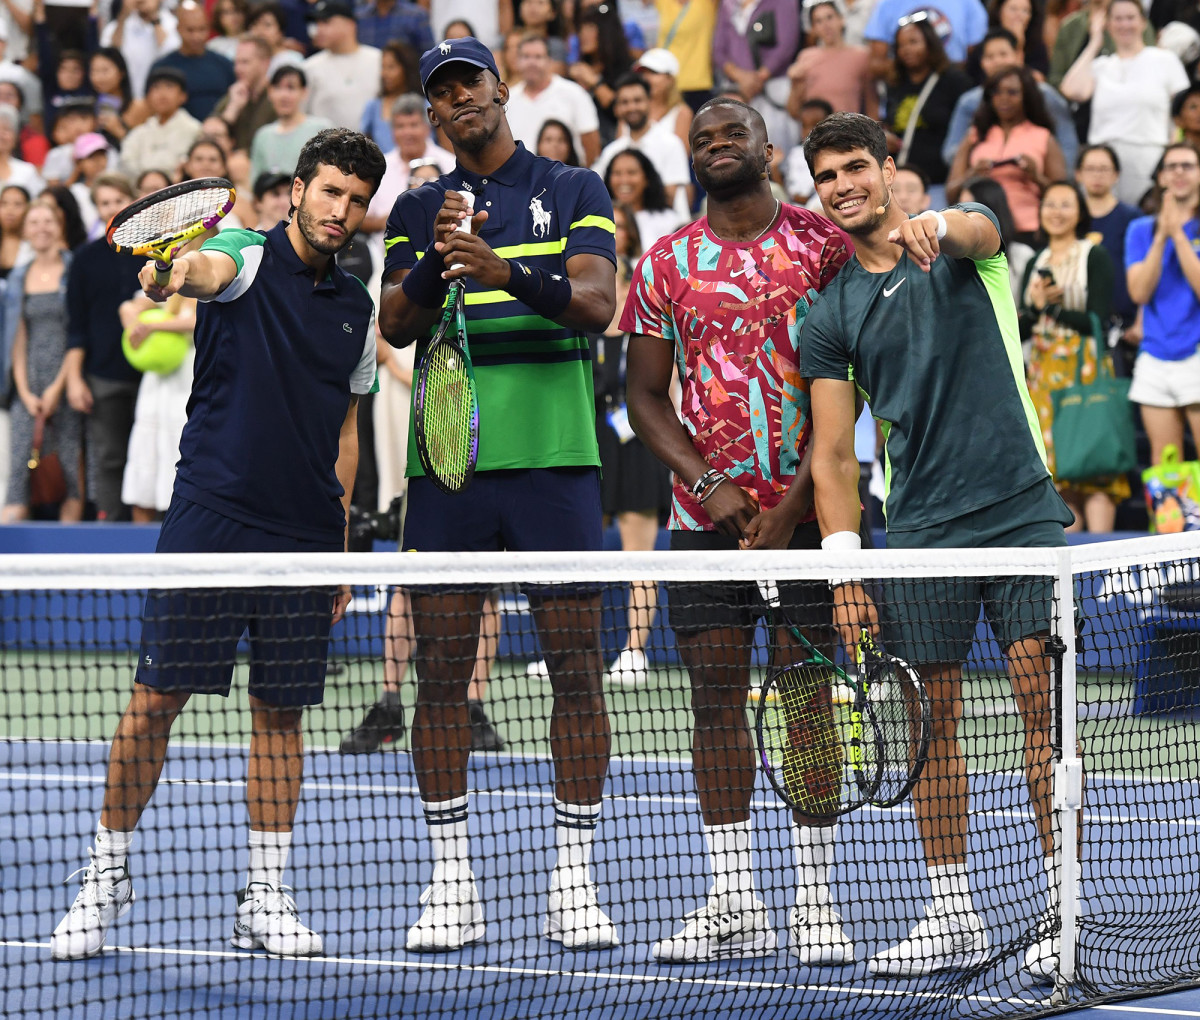 Jimmy Butler poses for a photo with Sebastián Yatra, Frances Tiafoe and Carlos Alcaraz at the U.S. Open.